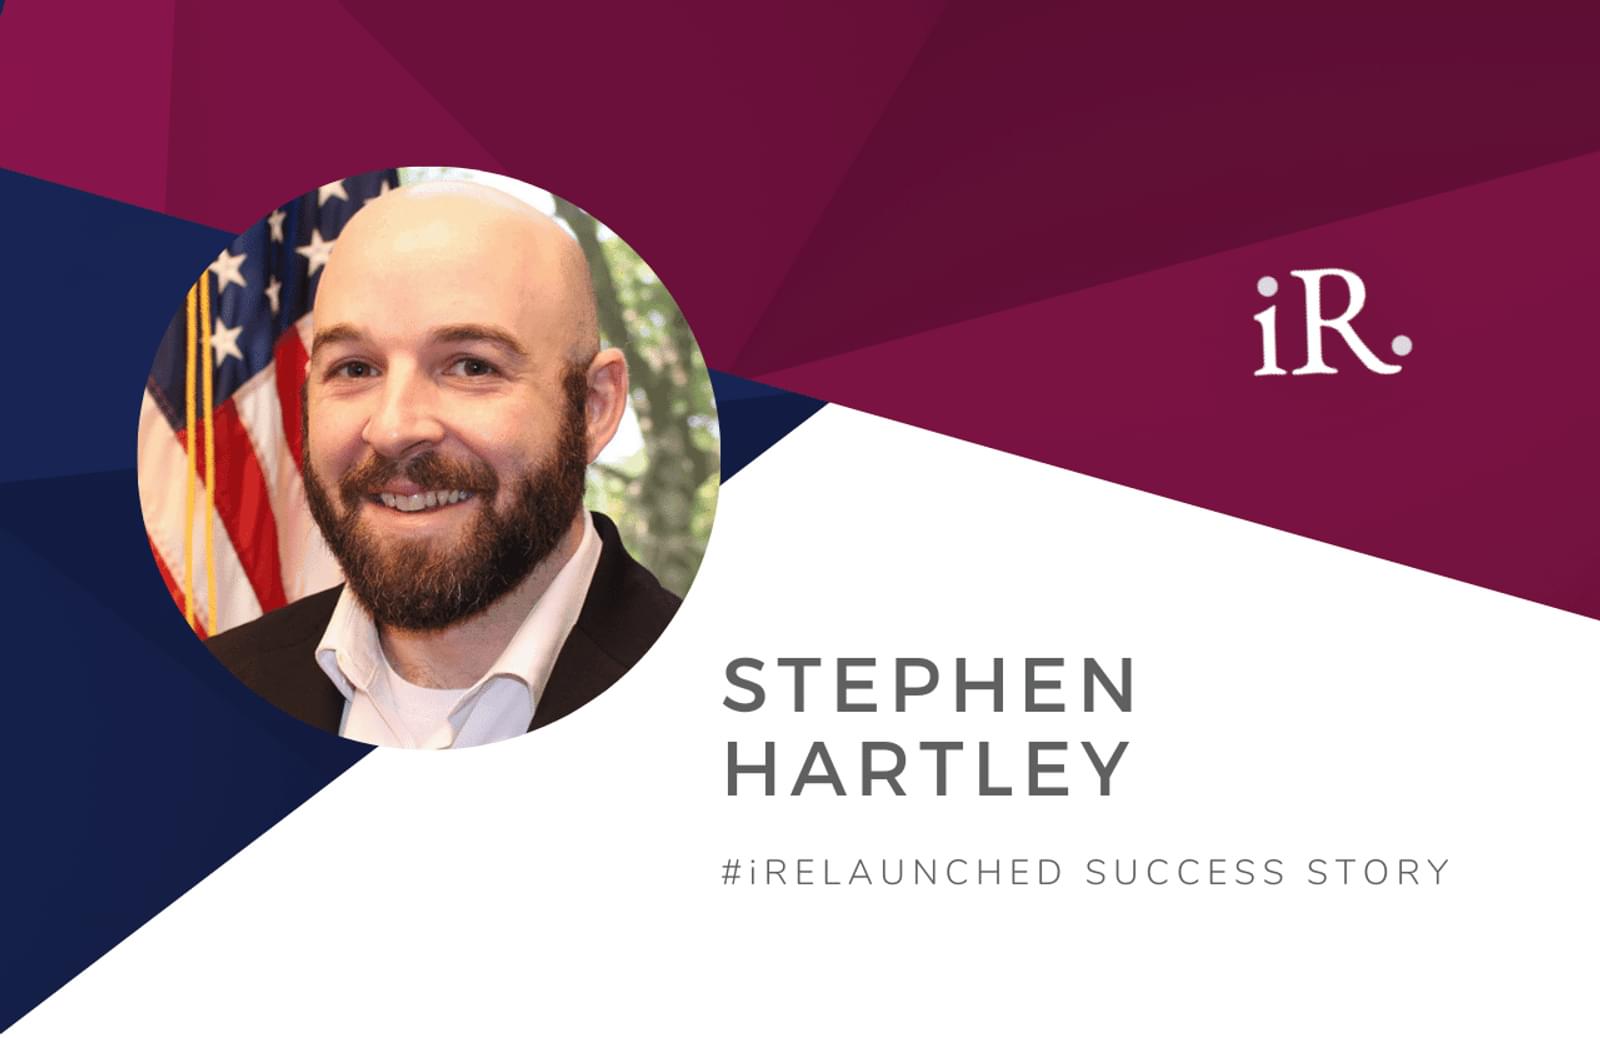 Stephen Hartley's headshot and the text #iRelaunched Success Story along with the iRelaunch logo.  A navy and maroon geometric textured background intersect behind Stephen's headshot.